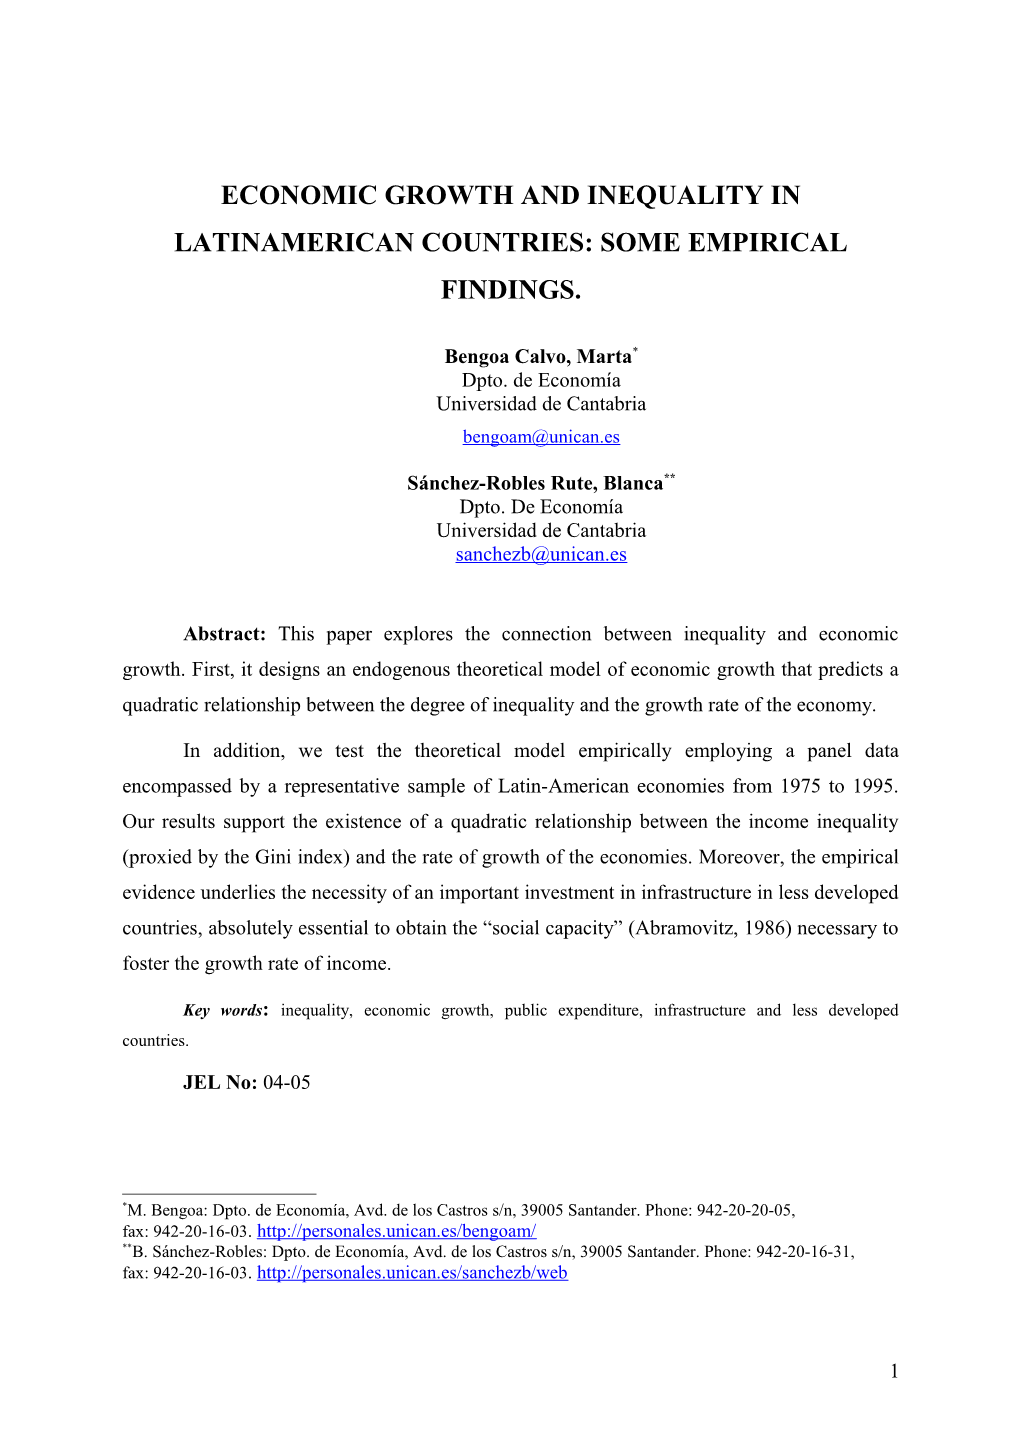 Economic Growth and Inequality in Latinamerican Countries: Some Empirical Findingsª